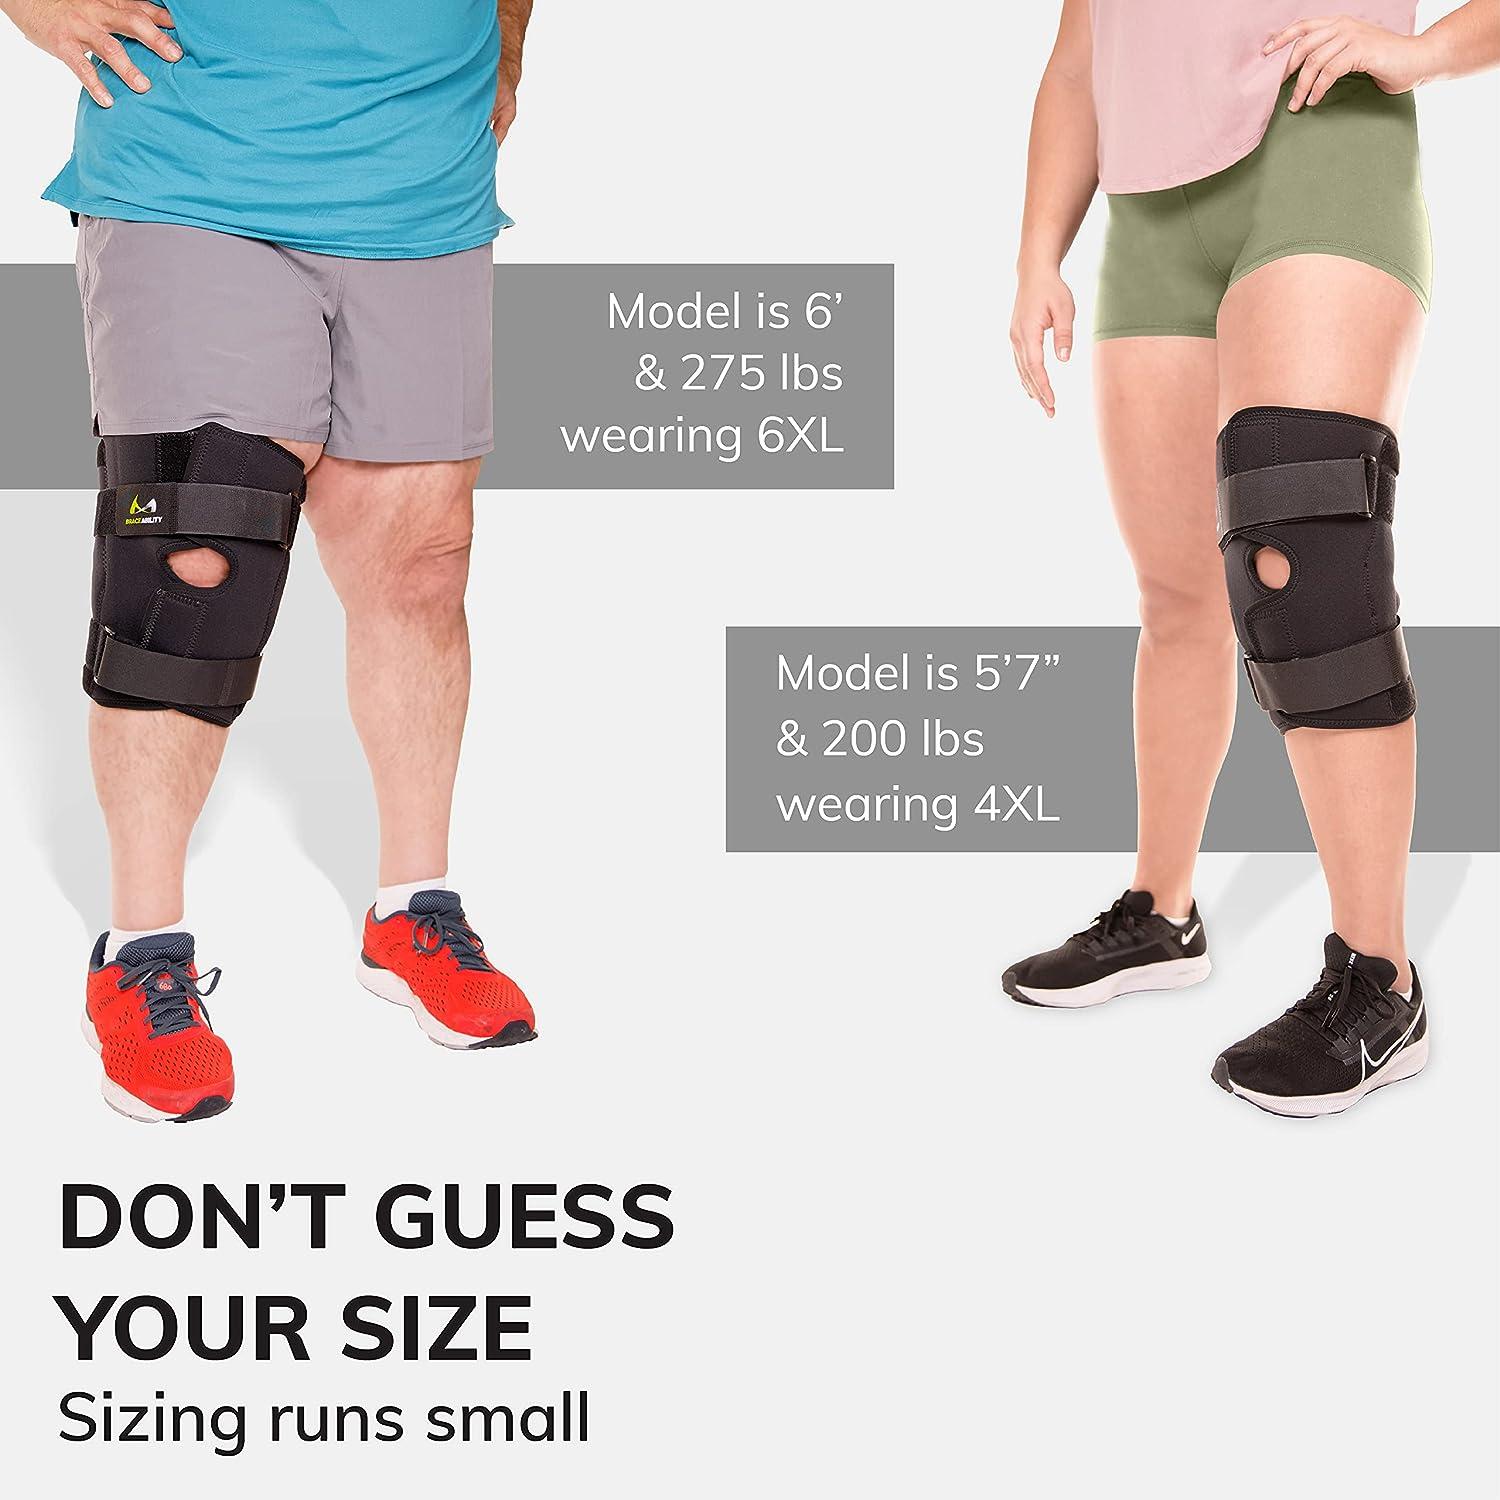 BraceAbility XXXXXL Plus Size Knee Brace - Bariatric Hinged Wraparound  Support for Large Legs and Big Thighs, Meniscus Tears, Arthritis Joint  Pain